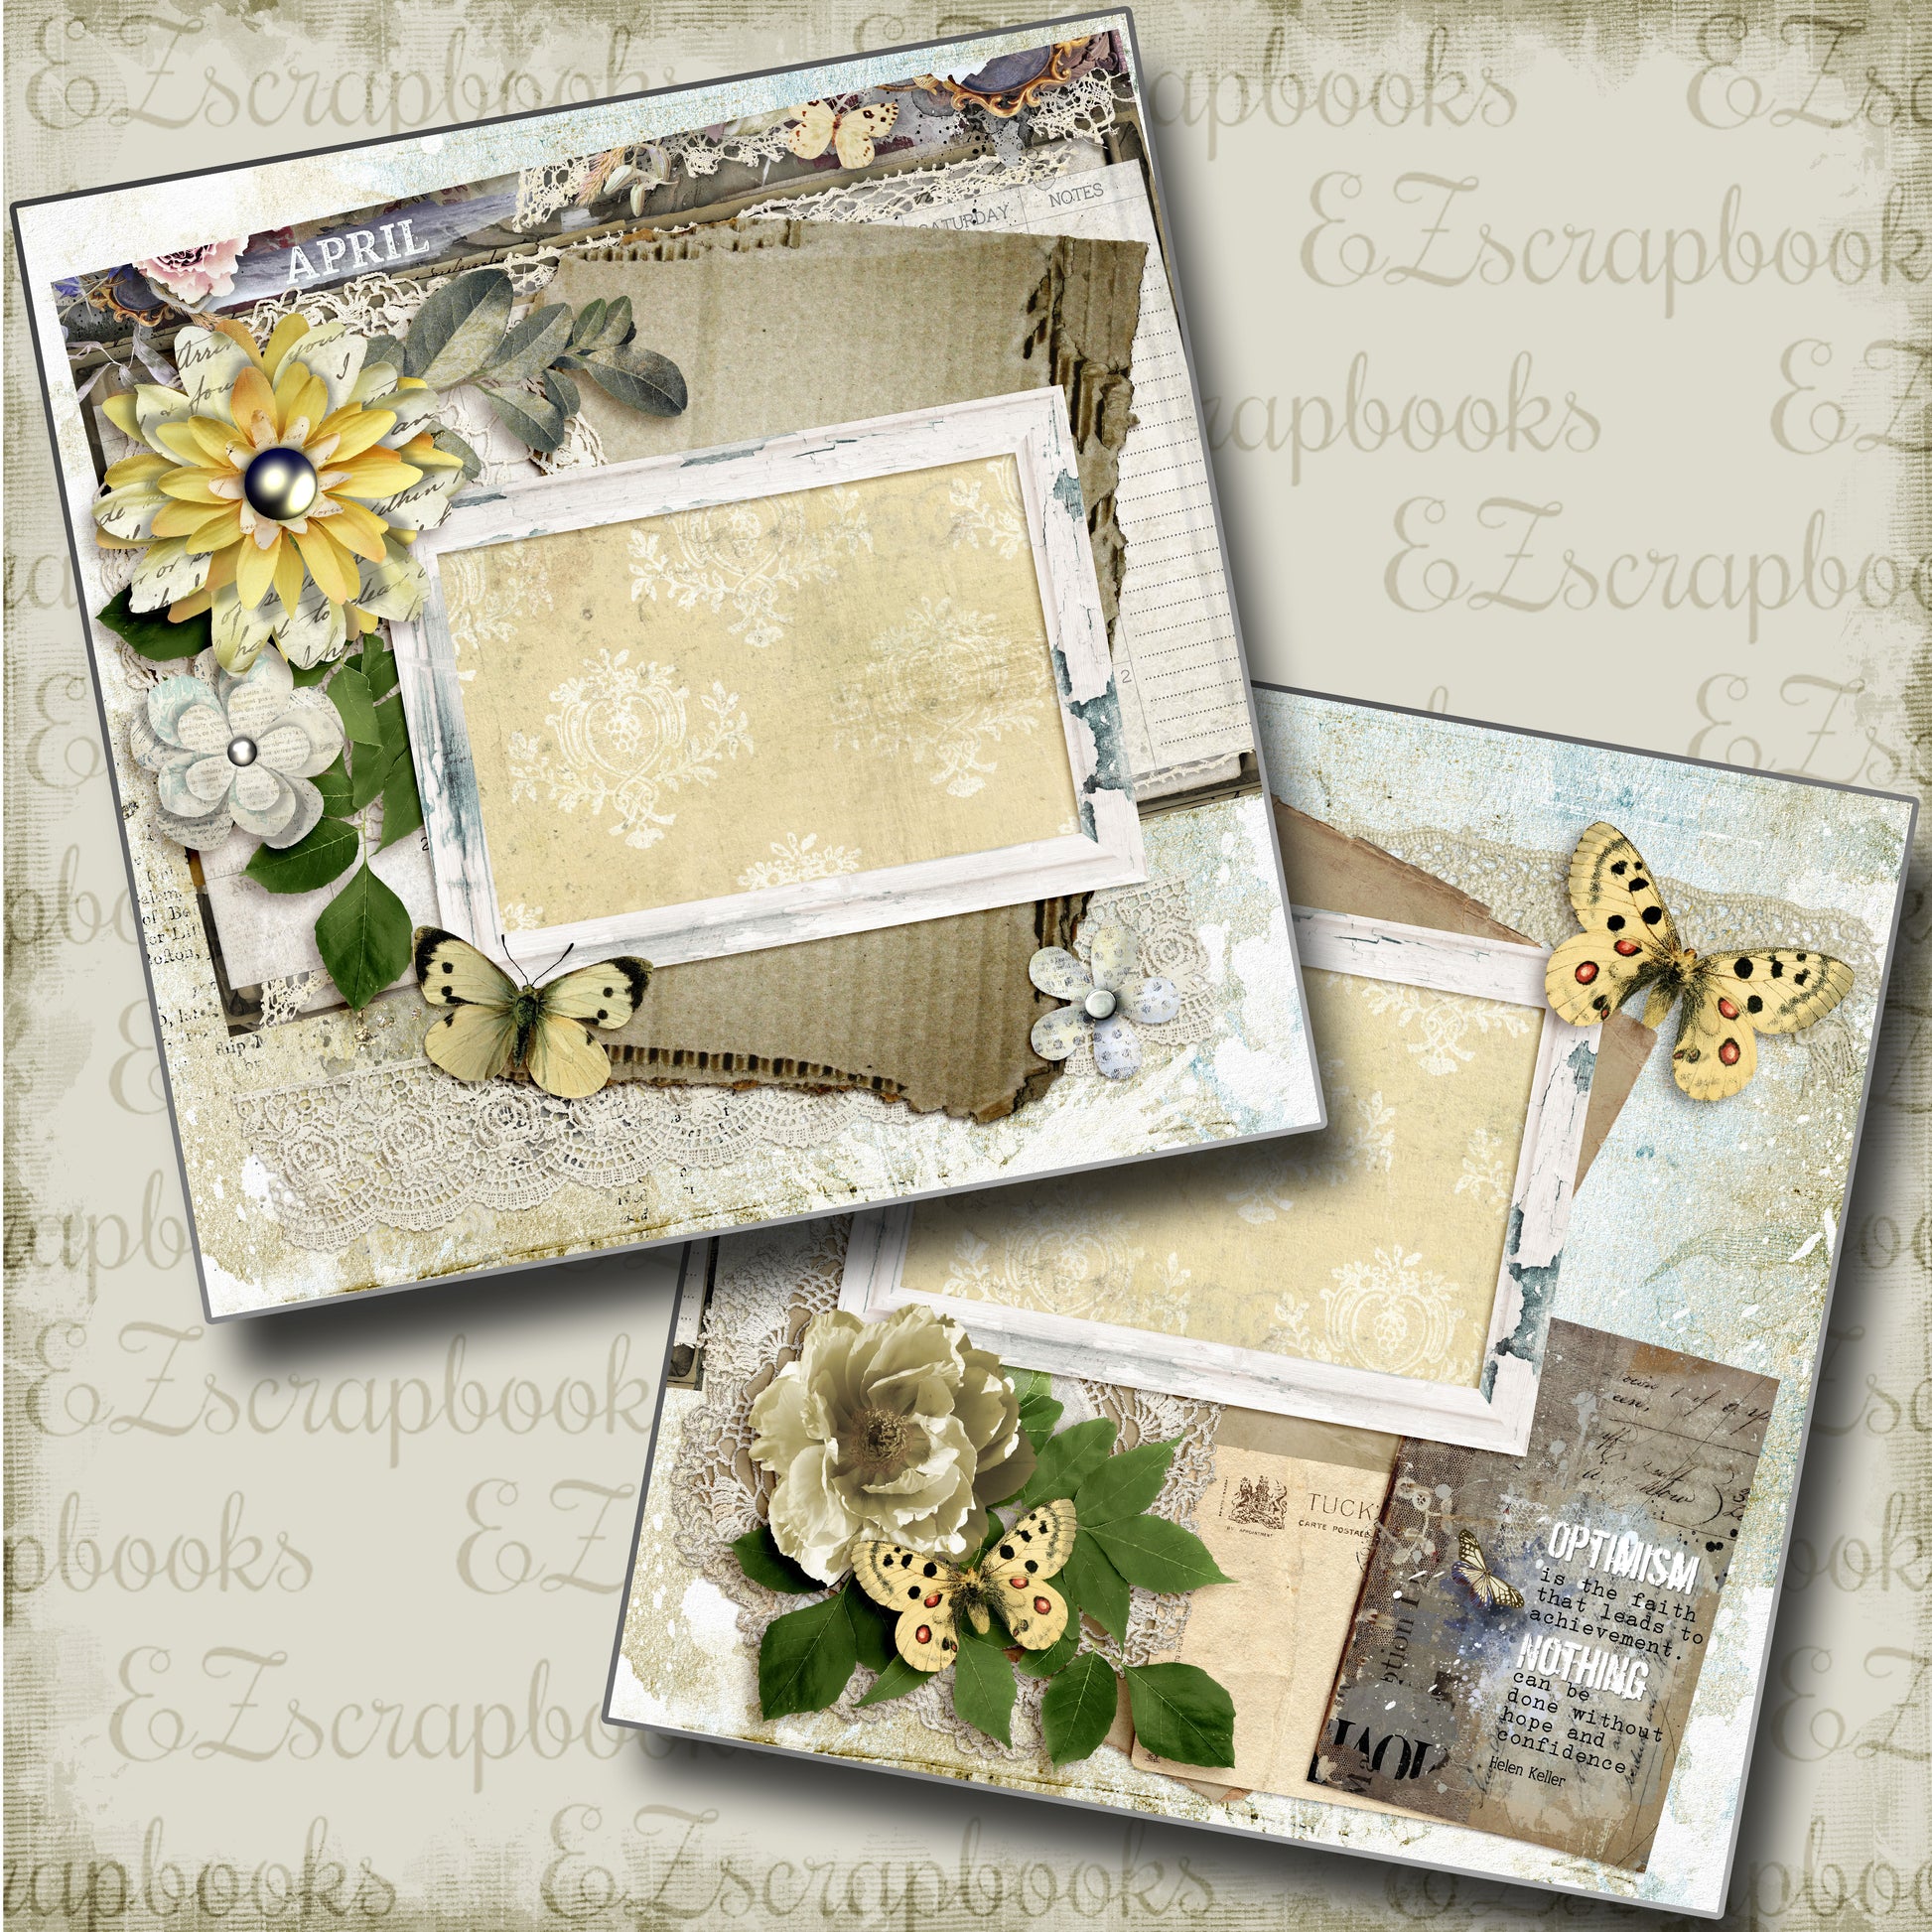 April - 4828 - EZscrapbooks Scrapbook Layouts Months of the Year